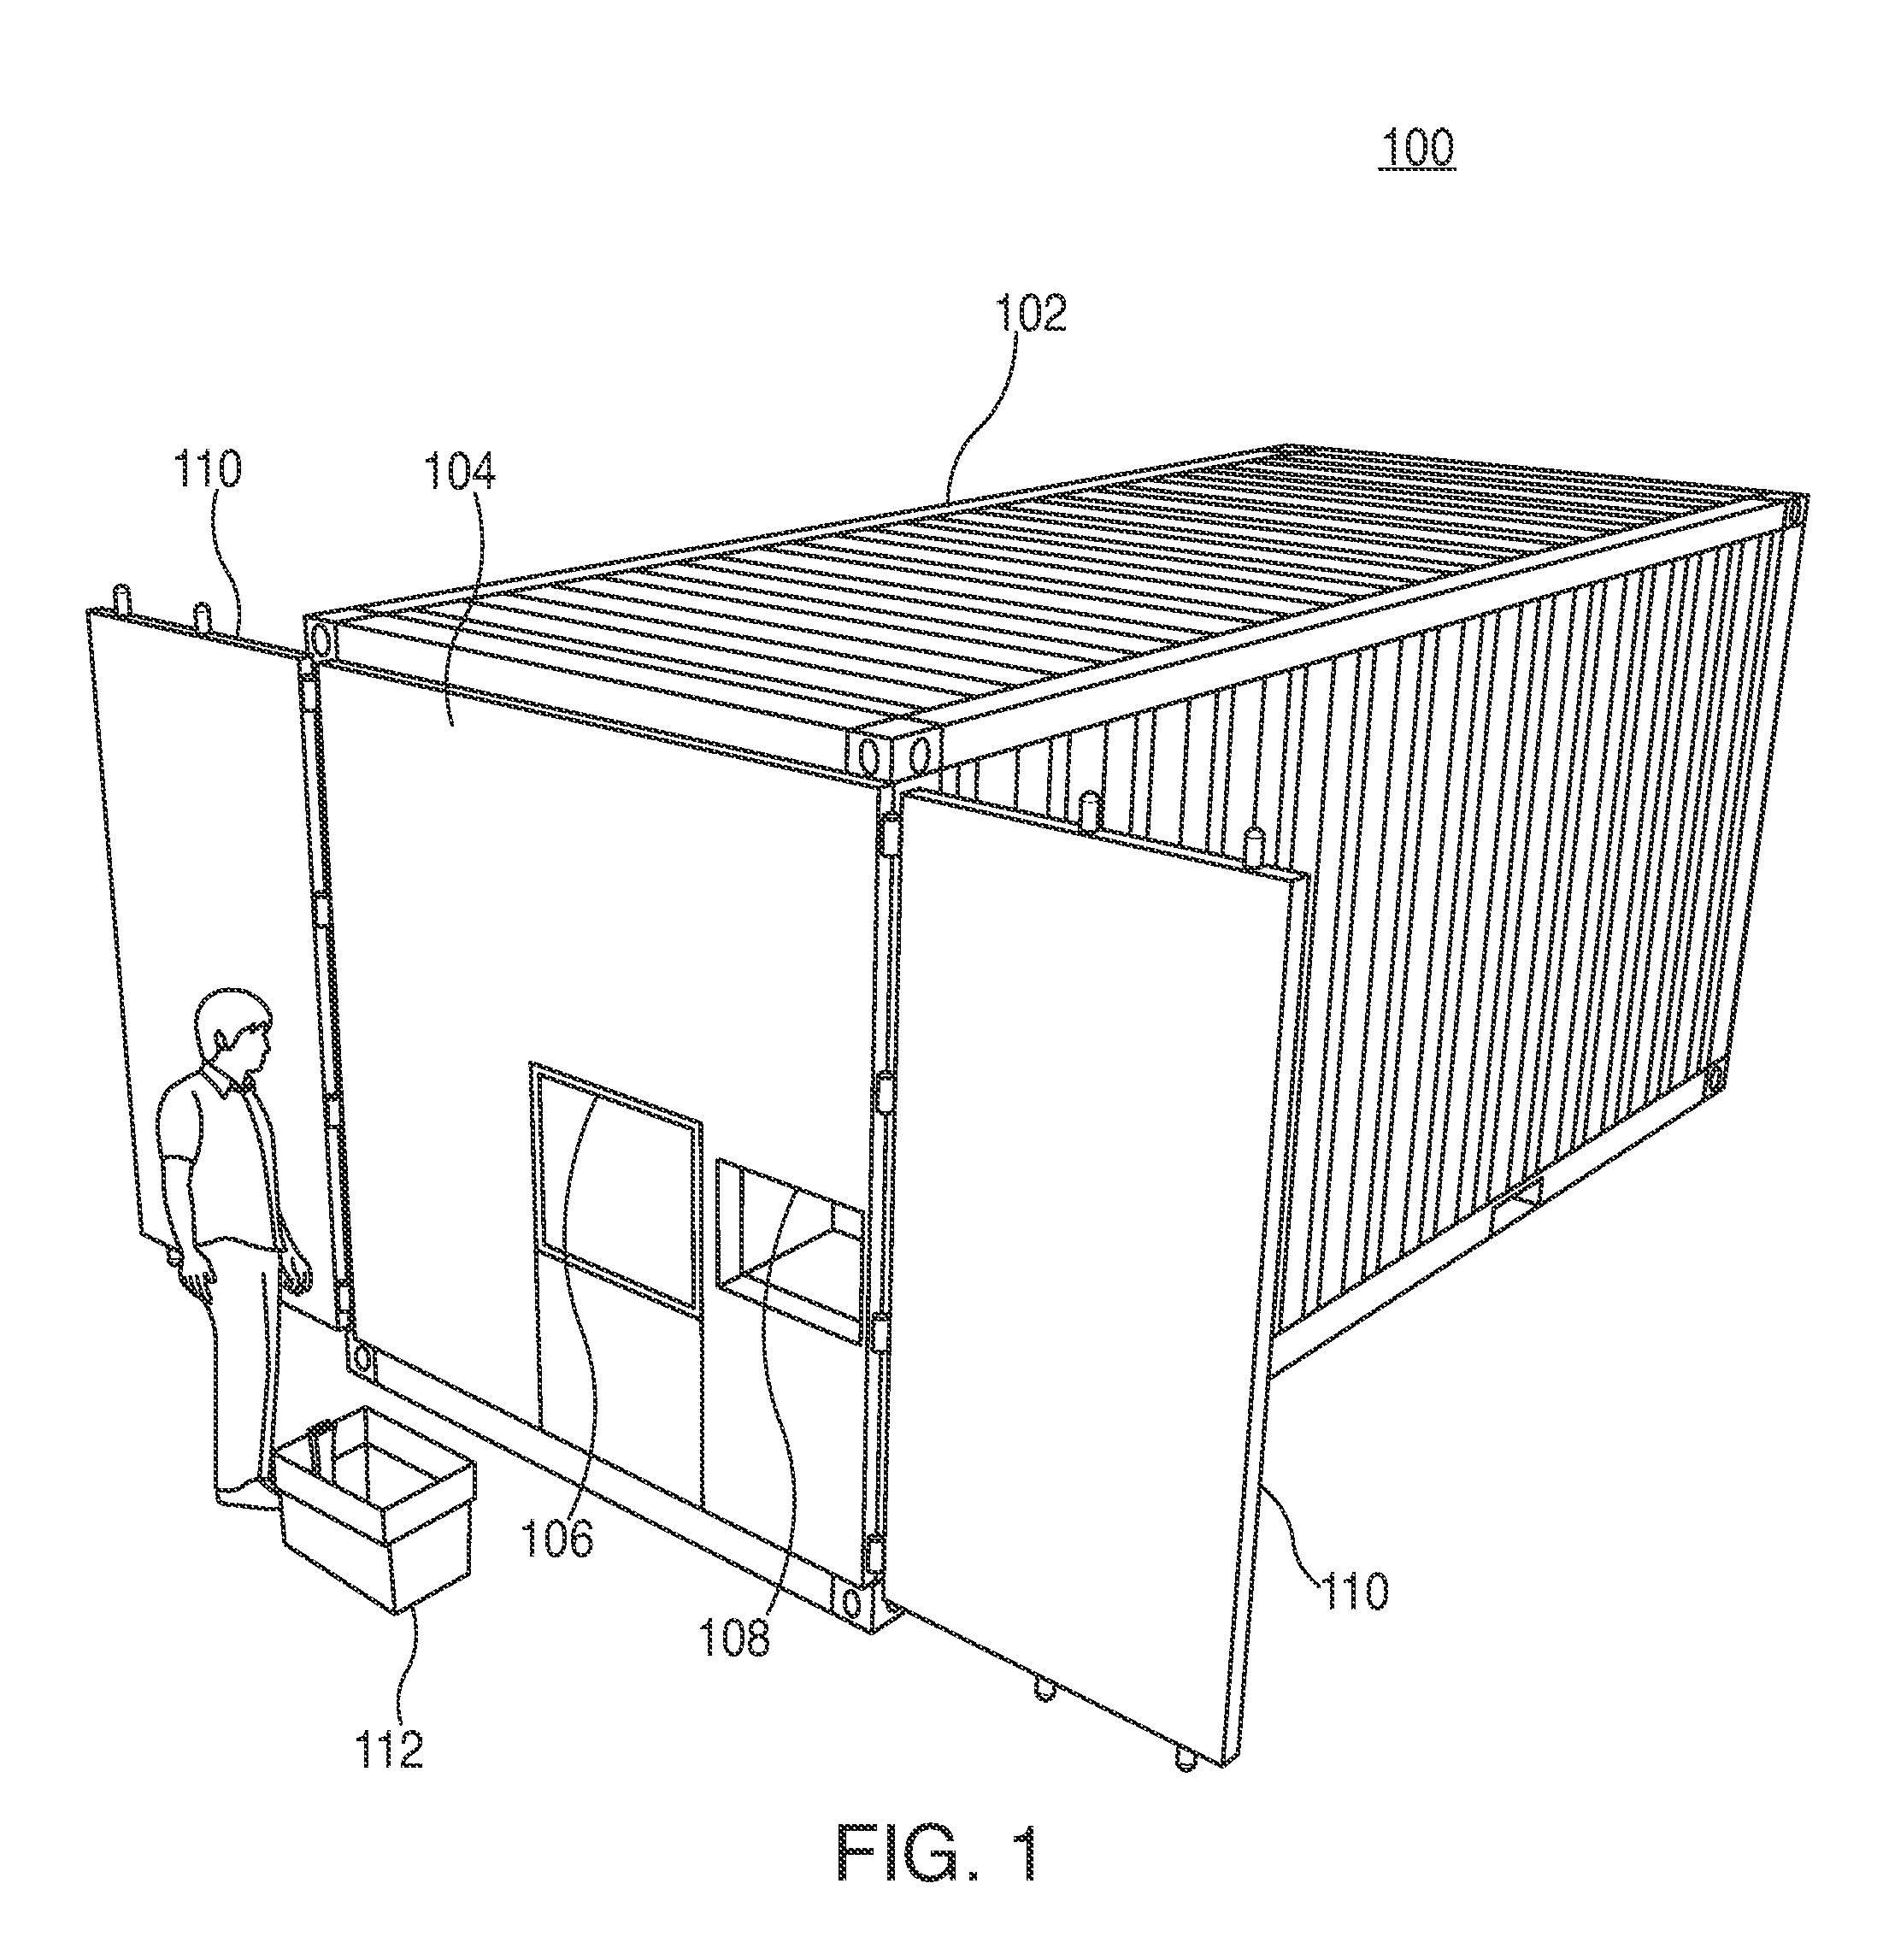 Apparatus, systems and methods for providing portable storage for multiple users